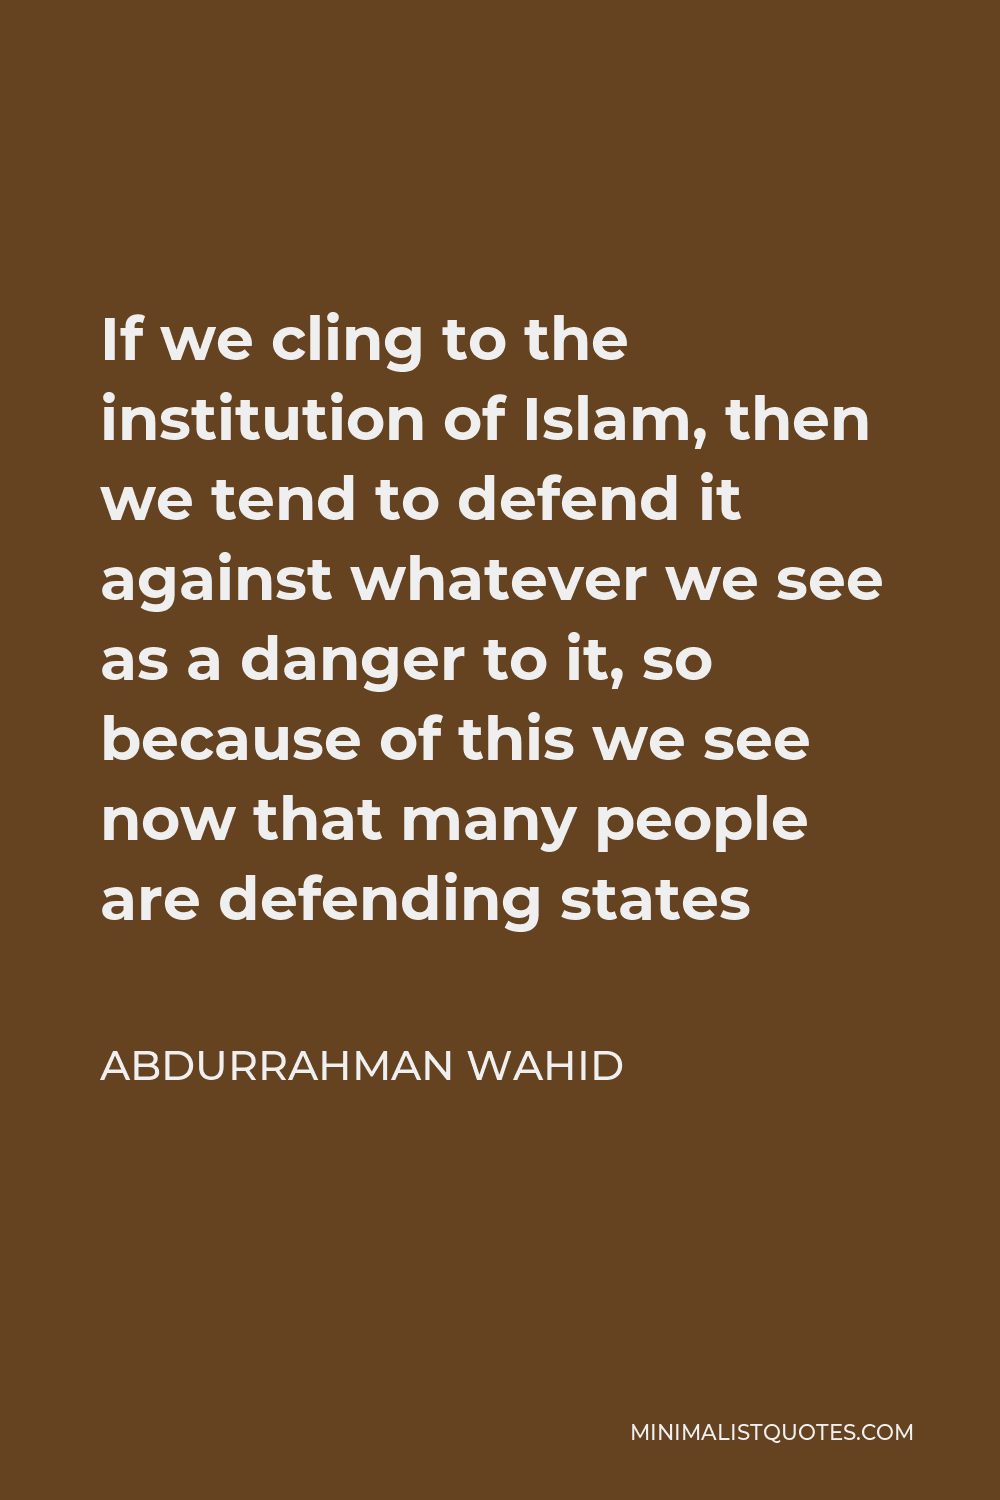 Abdurrahman Wahid Quote - If we cling to the institution of Islam, then we tend to defend it against whatever we see as a danger to it, so because of this we see now that many people are defending states